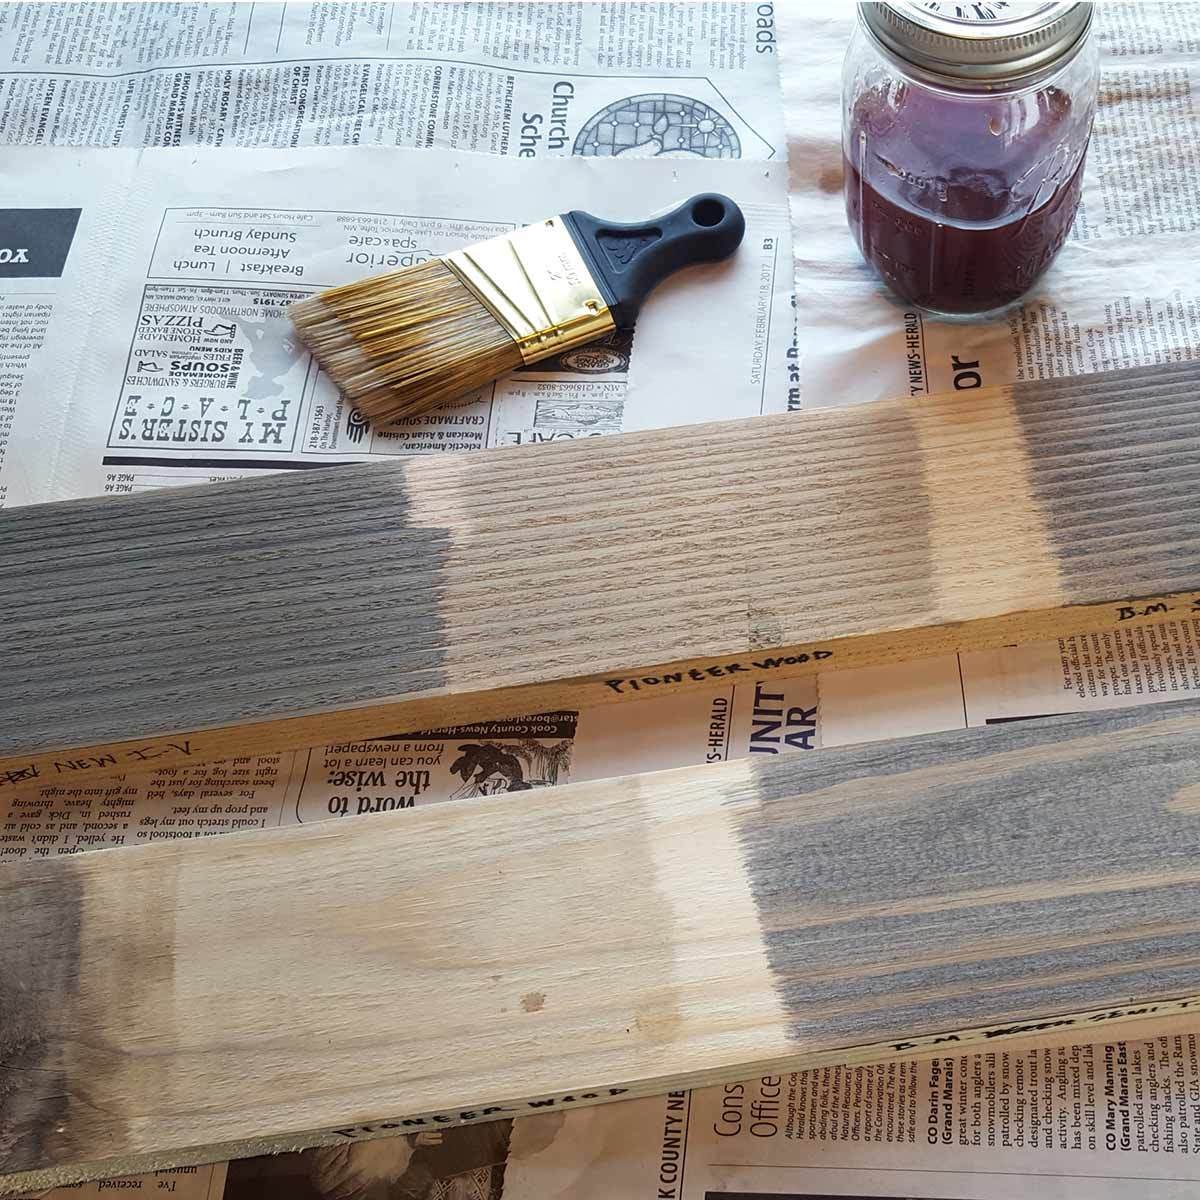 How to Make Wood Look Old And Gray: Pro Tips for Authentic Aging